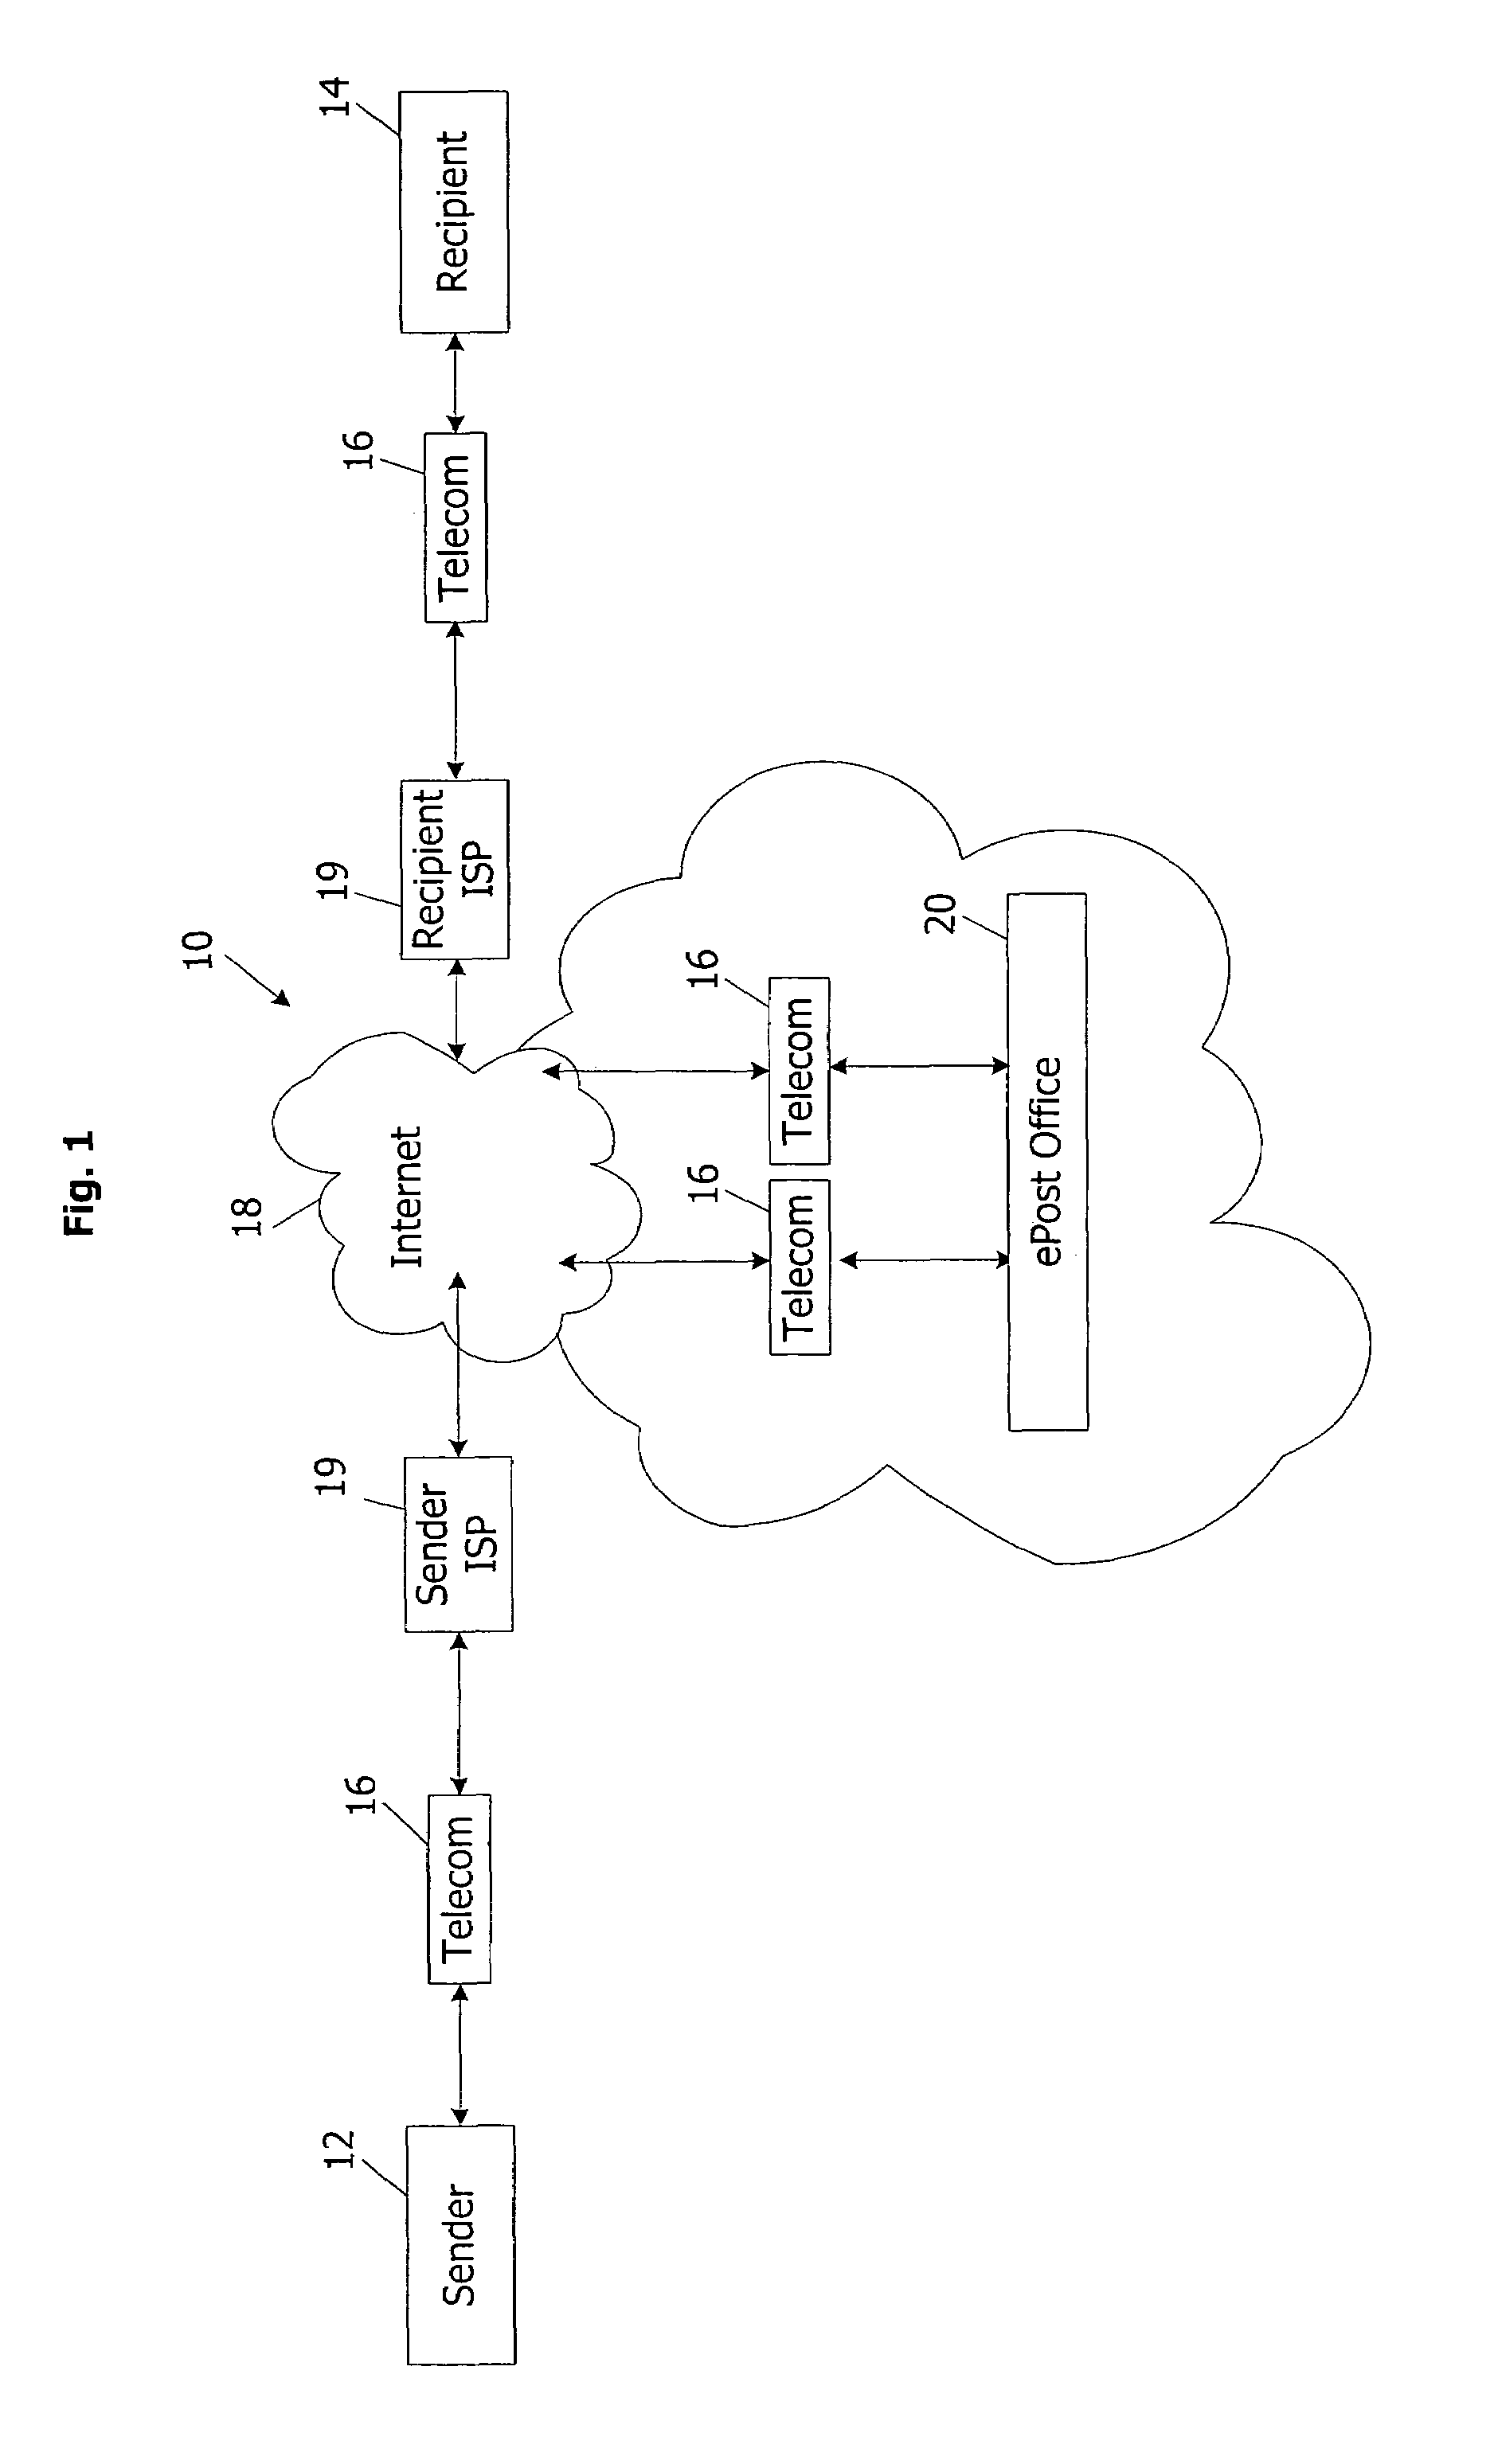 Messaging and document management system and method